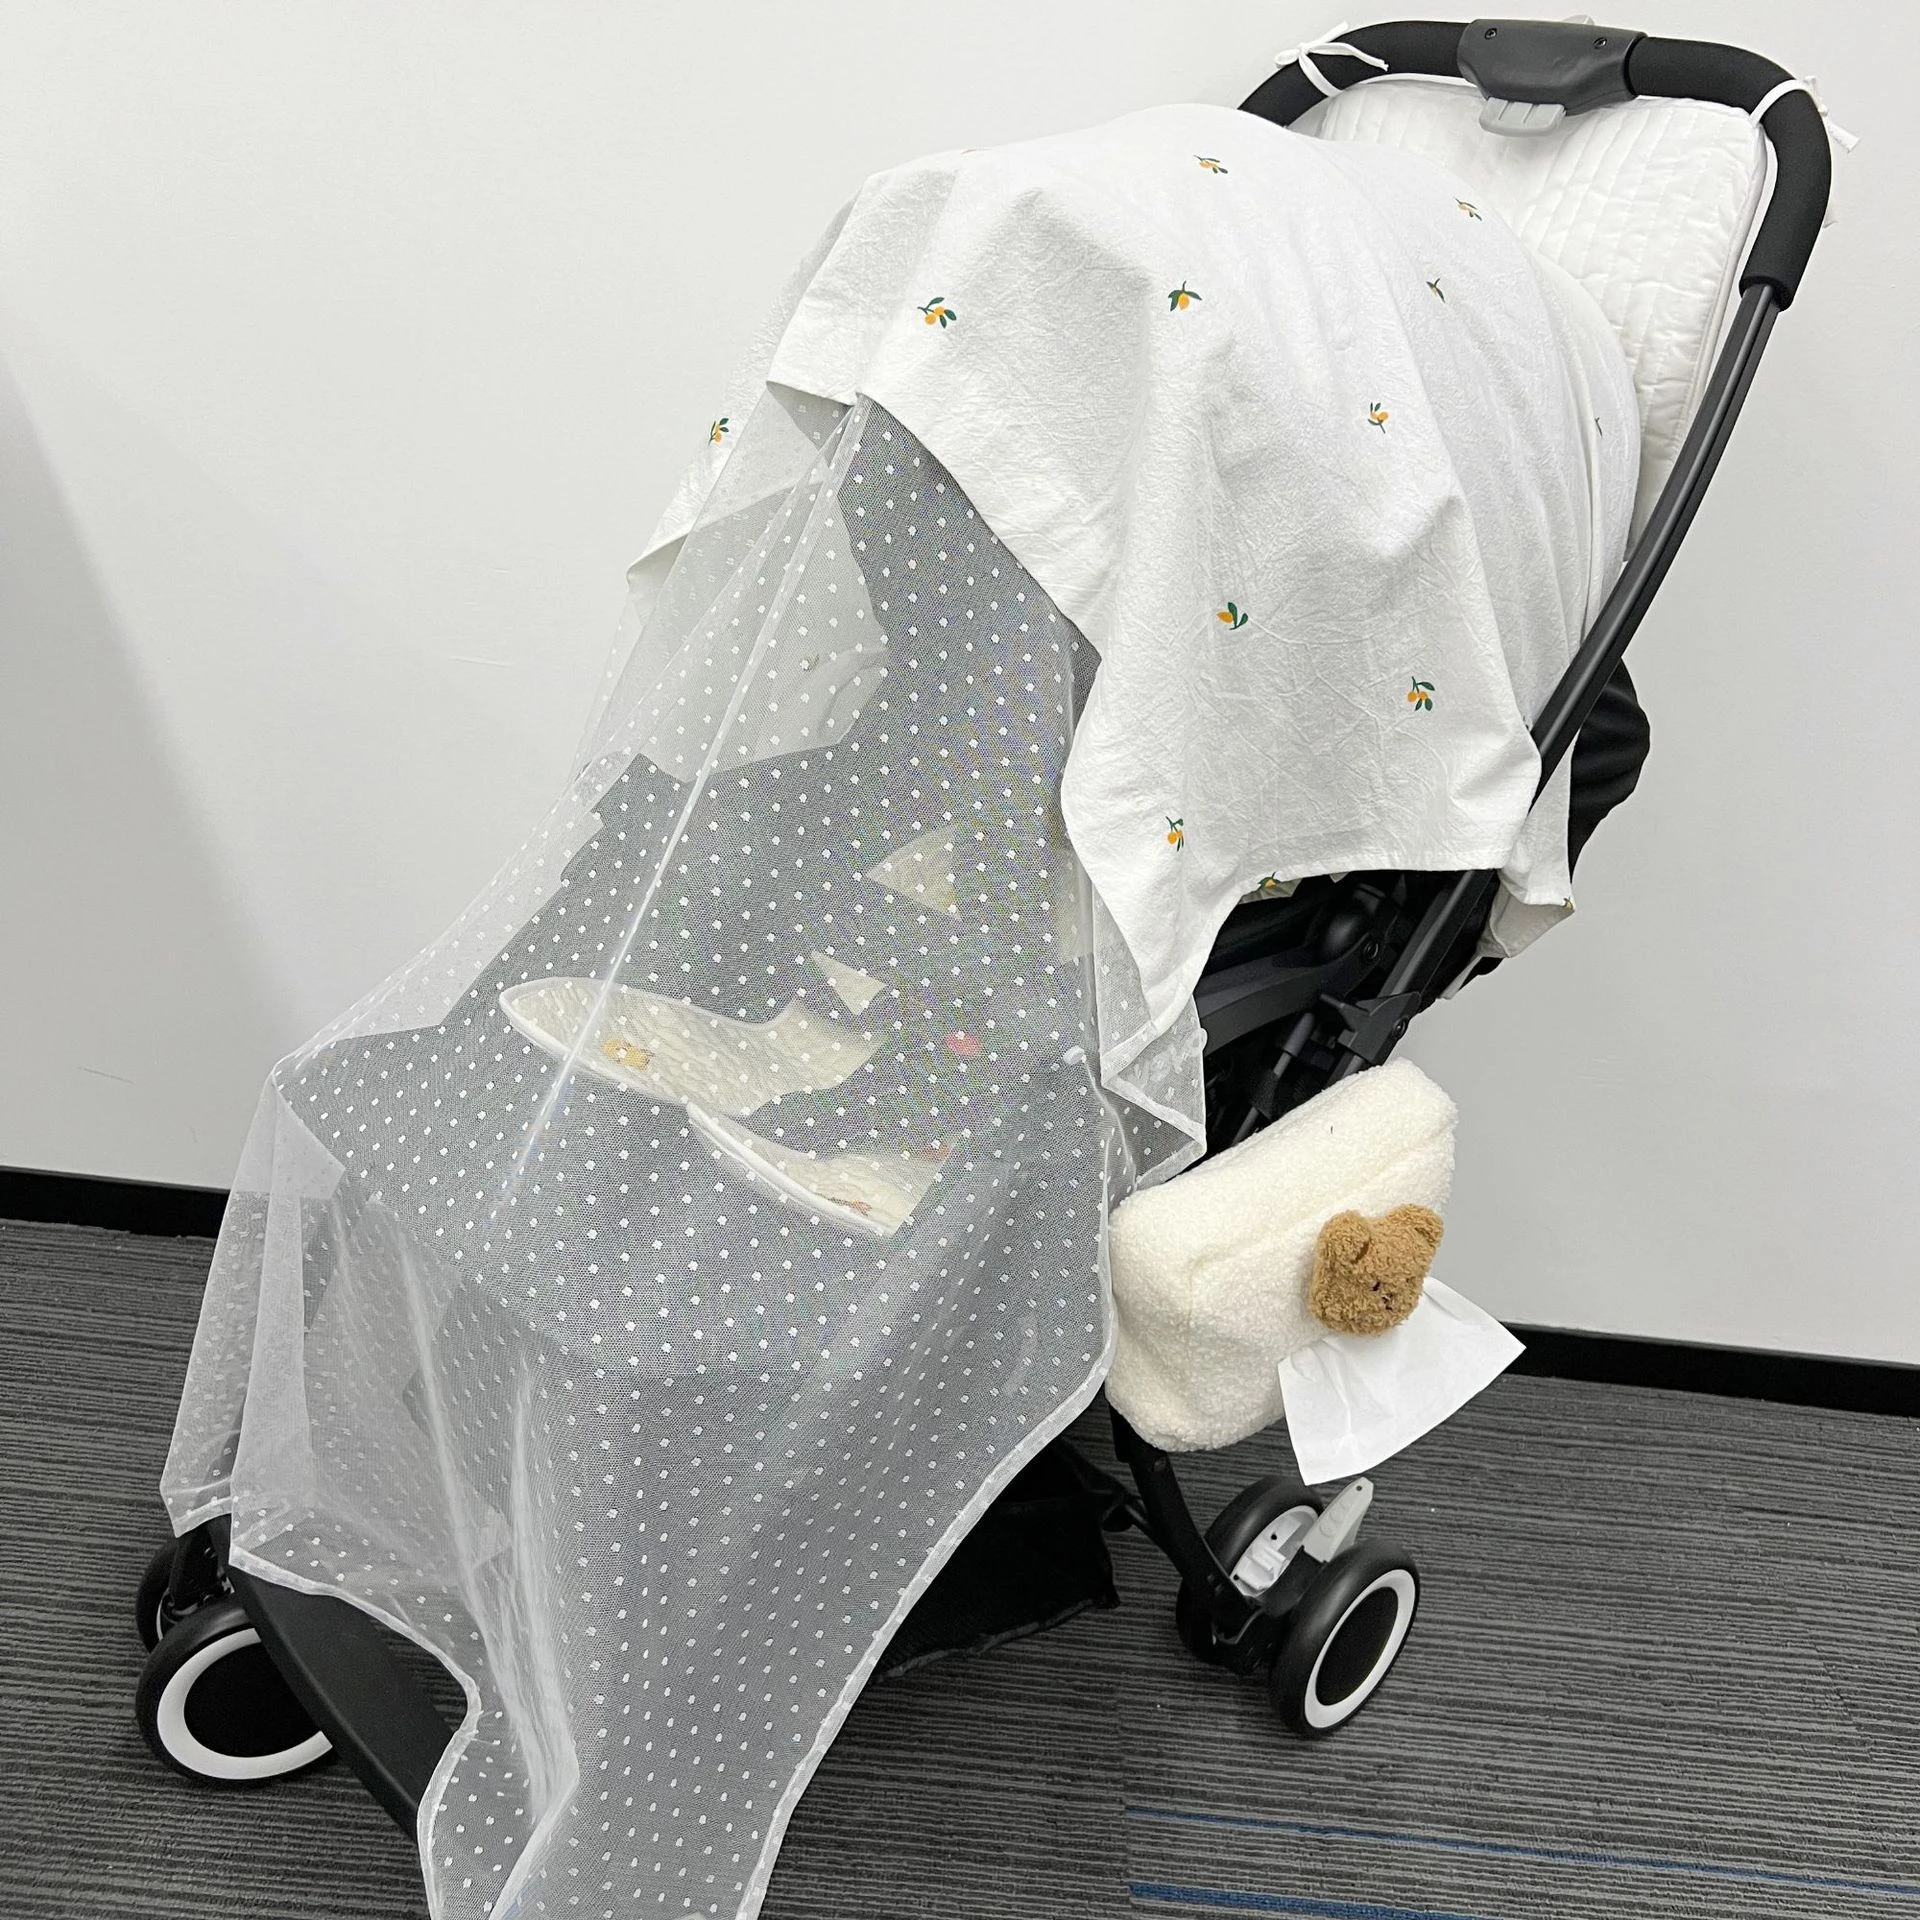 baby stroller cover for rain Stroller Sunshade Canopy with Mosquito Net Insect Shield Netting Anti-UV Baby Stroller Sun Visor Infant Carriage Canopy Covers baby stroller accessories baby bottle rack	